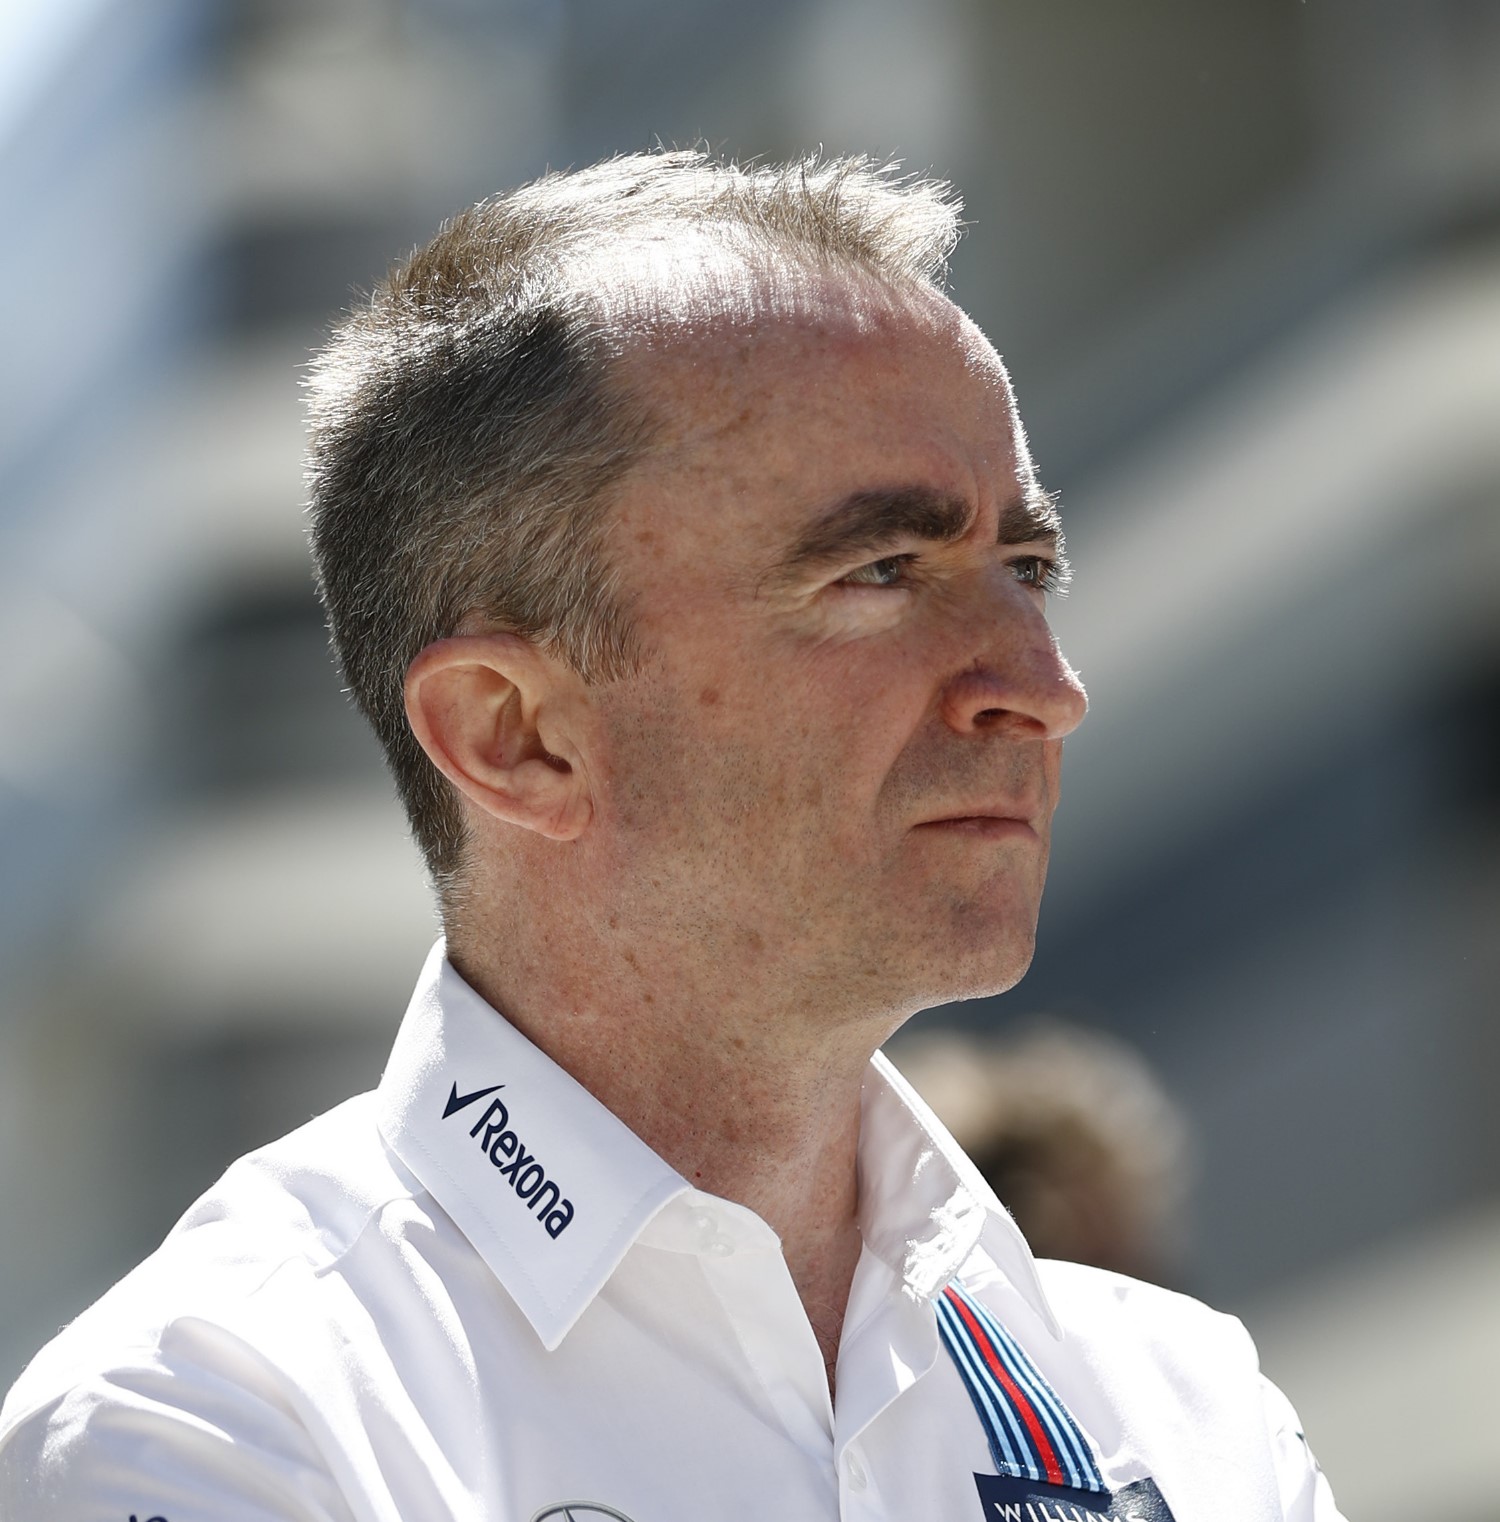 It wasn't Paddy Lowe that make the Mercedes fast, it was Aldo Costa. Williams stole the wrong guy.